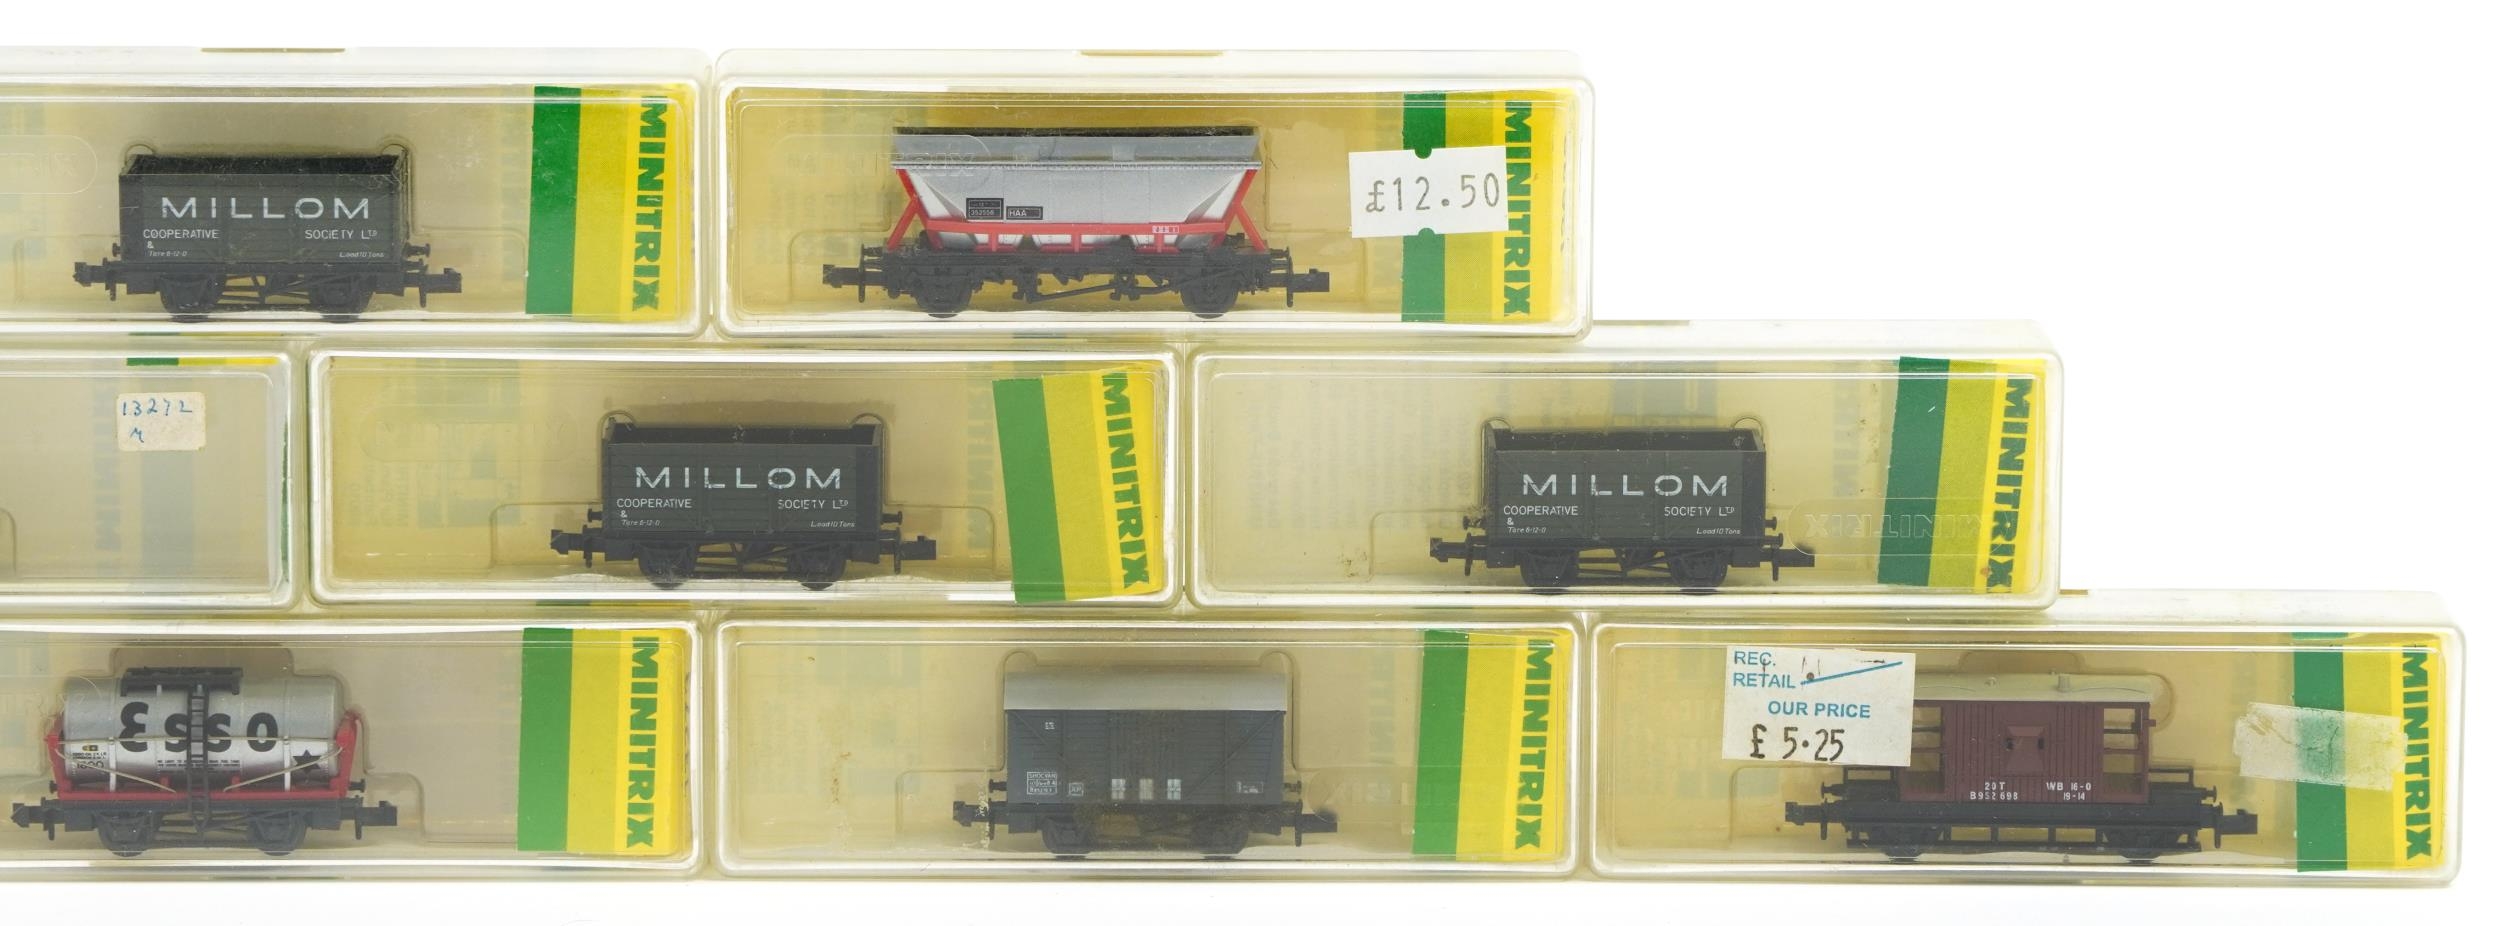 Fifteen Minitrix N gauge model railway goods wagons and tankers with cases - Image 4 of 5